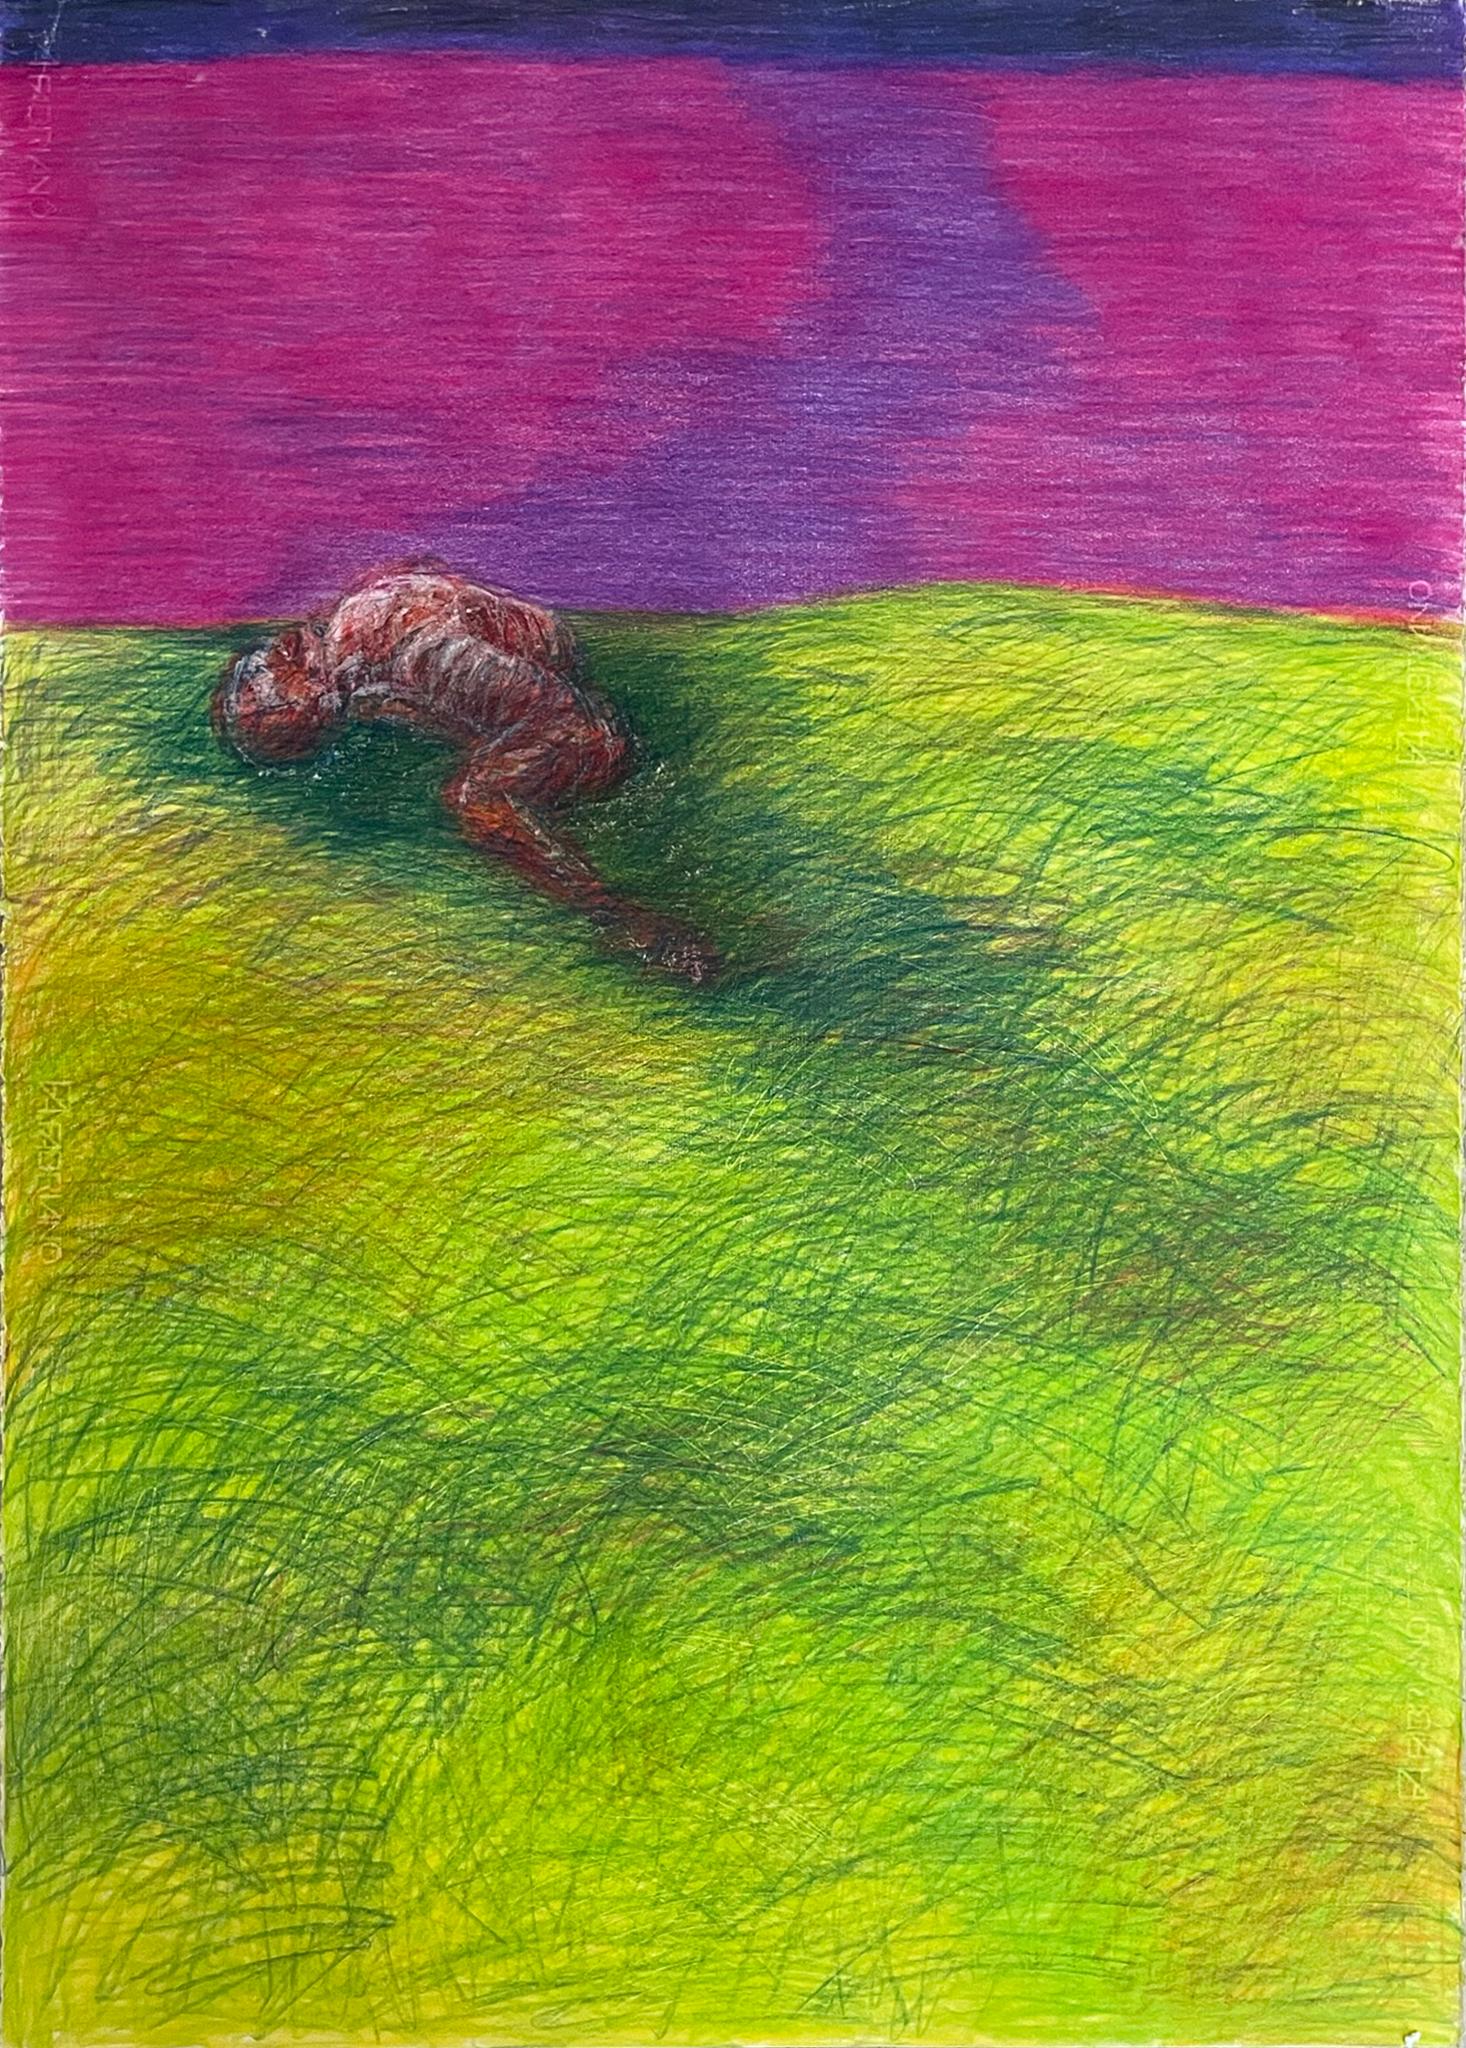 Zsolt Berszán Figurative Art - Untitled_Remains. The Dead Body on the Field